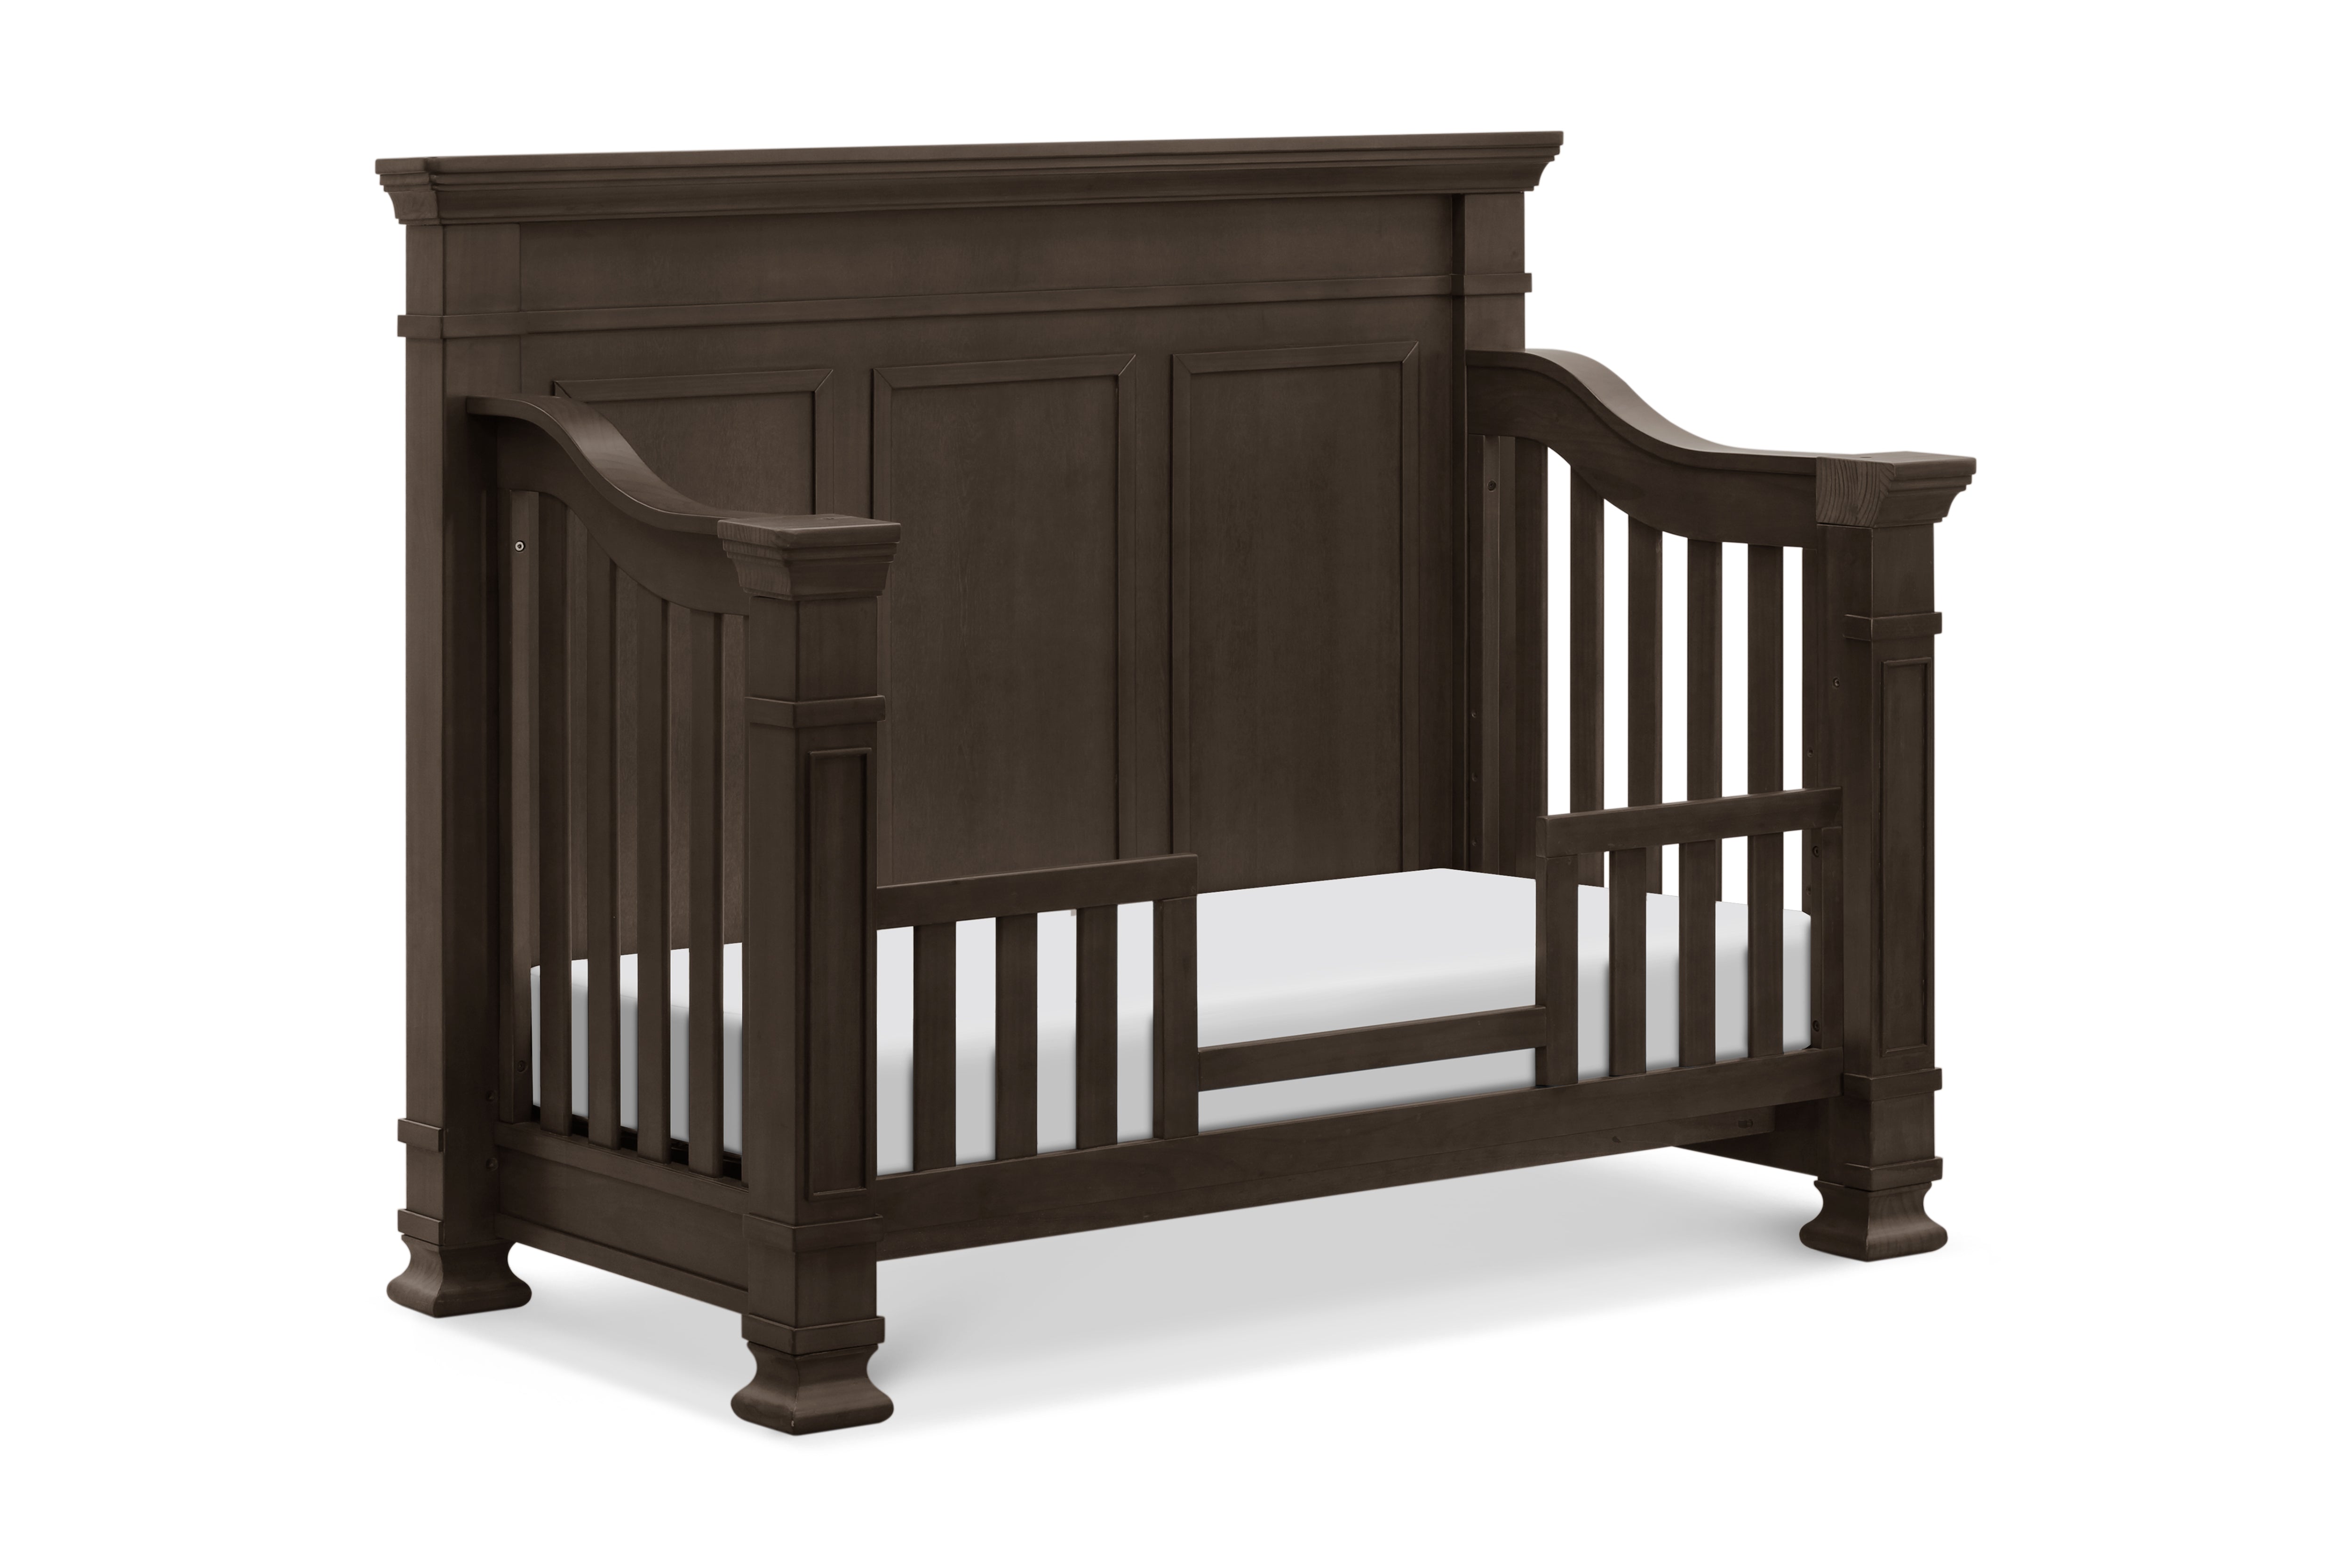 Tillen crib converted to toddler bed, shown in truffle